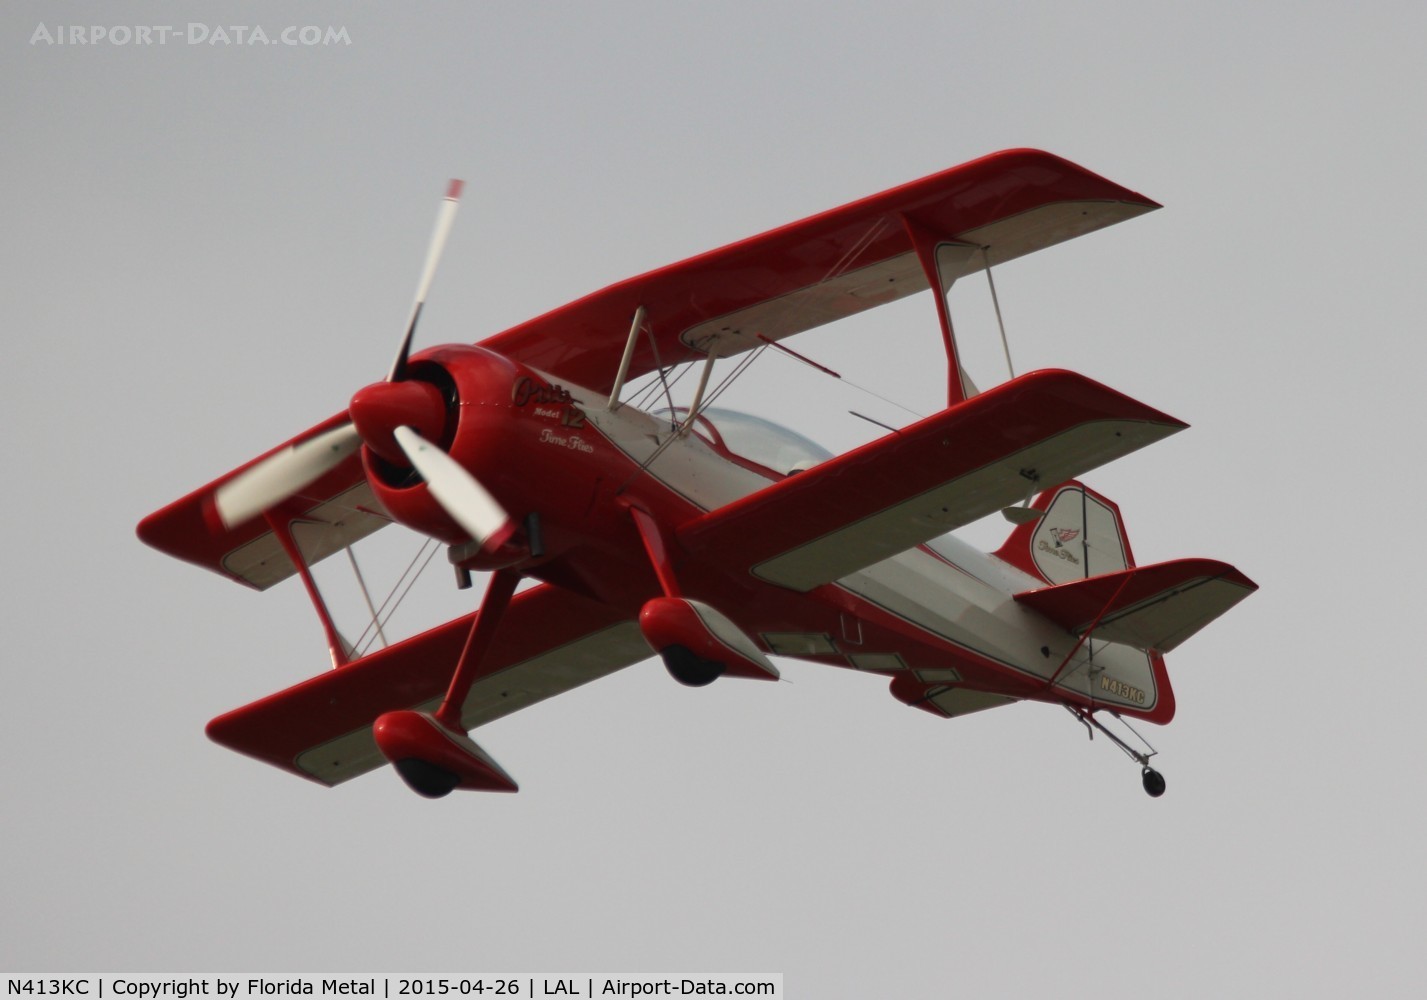 N413KC, 2011 Pitts M12 C/N 296, Pitts 12